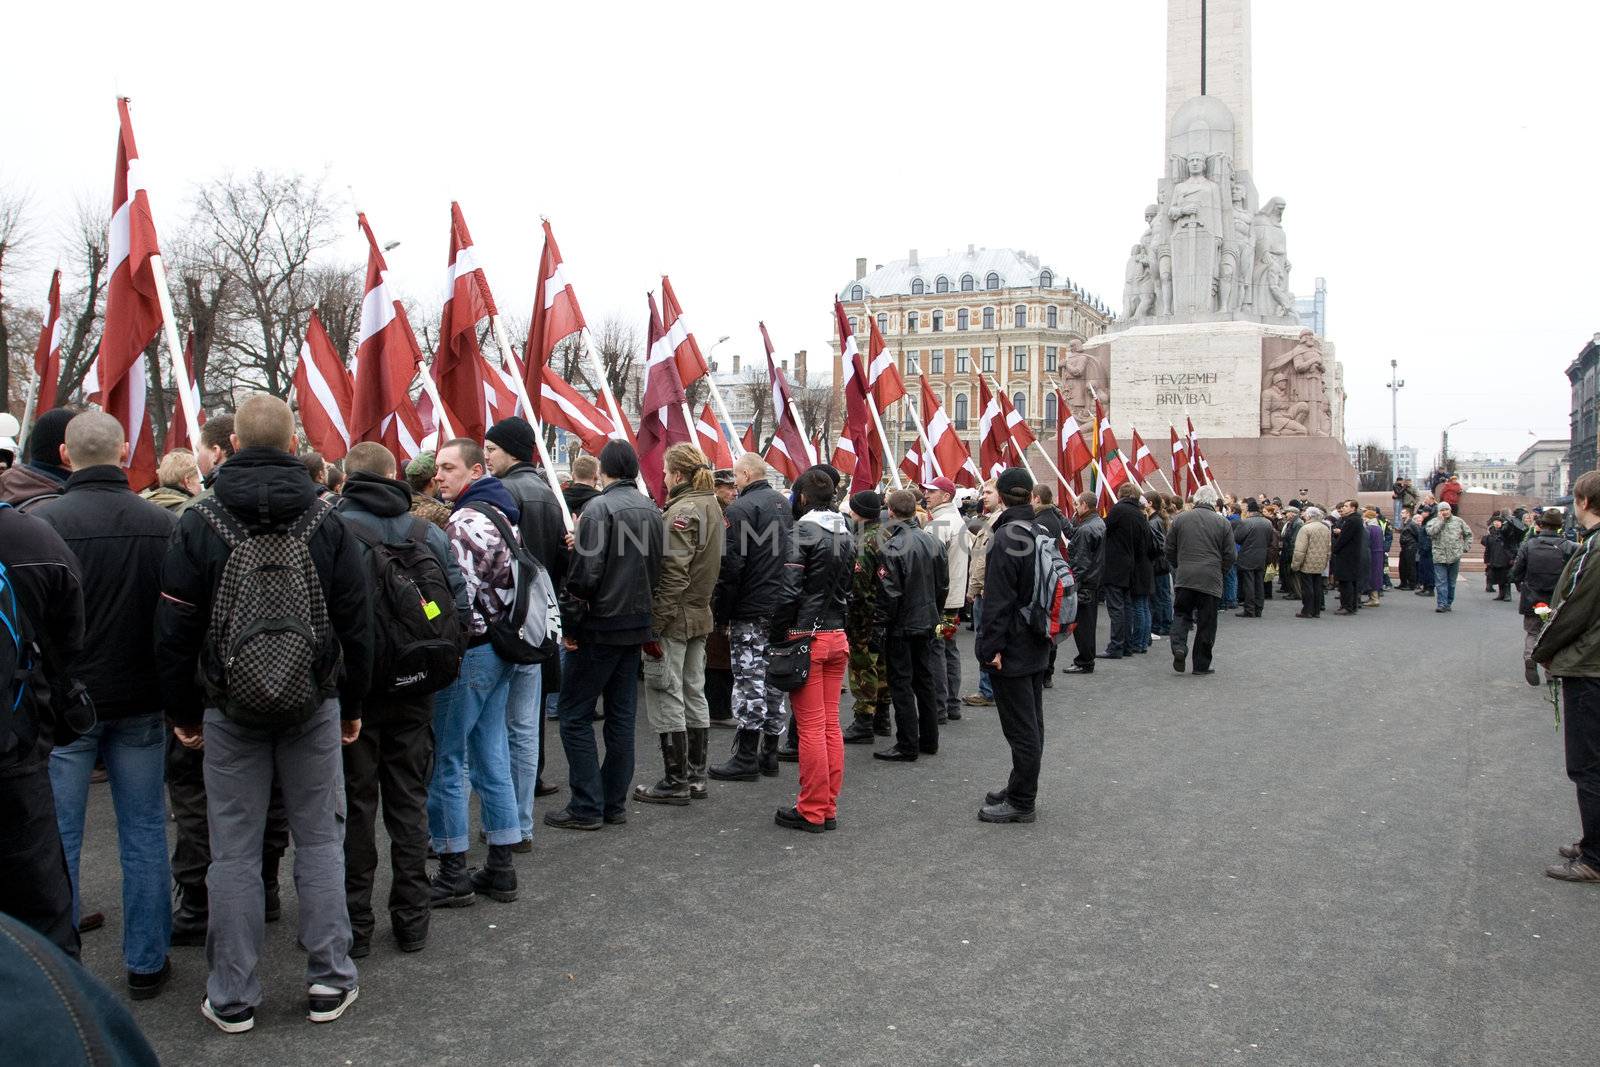 Riga, Latvia, March 16, 2009. Commemoration of the Latvian Waffen SS unit or Legionnaires.The event is always drawing crowds of nationalists and anti-fascist. Many Latvians legionnaires were forcibly called uo to join the Latvian SS Legion.